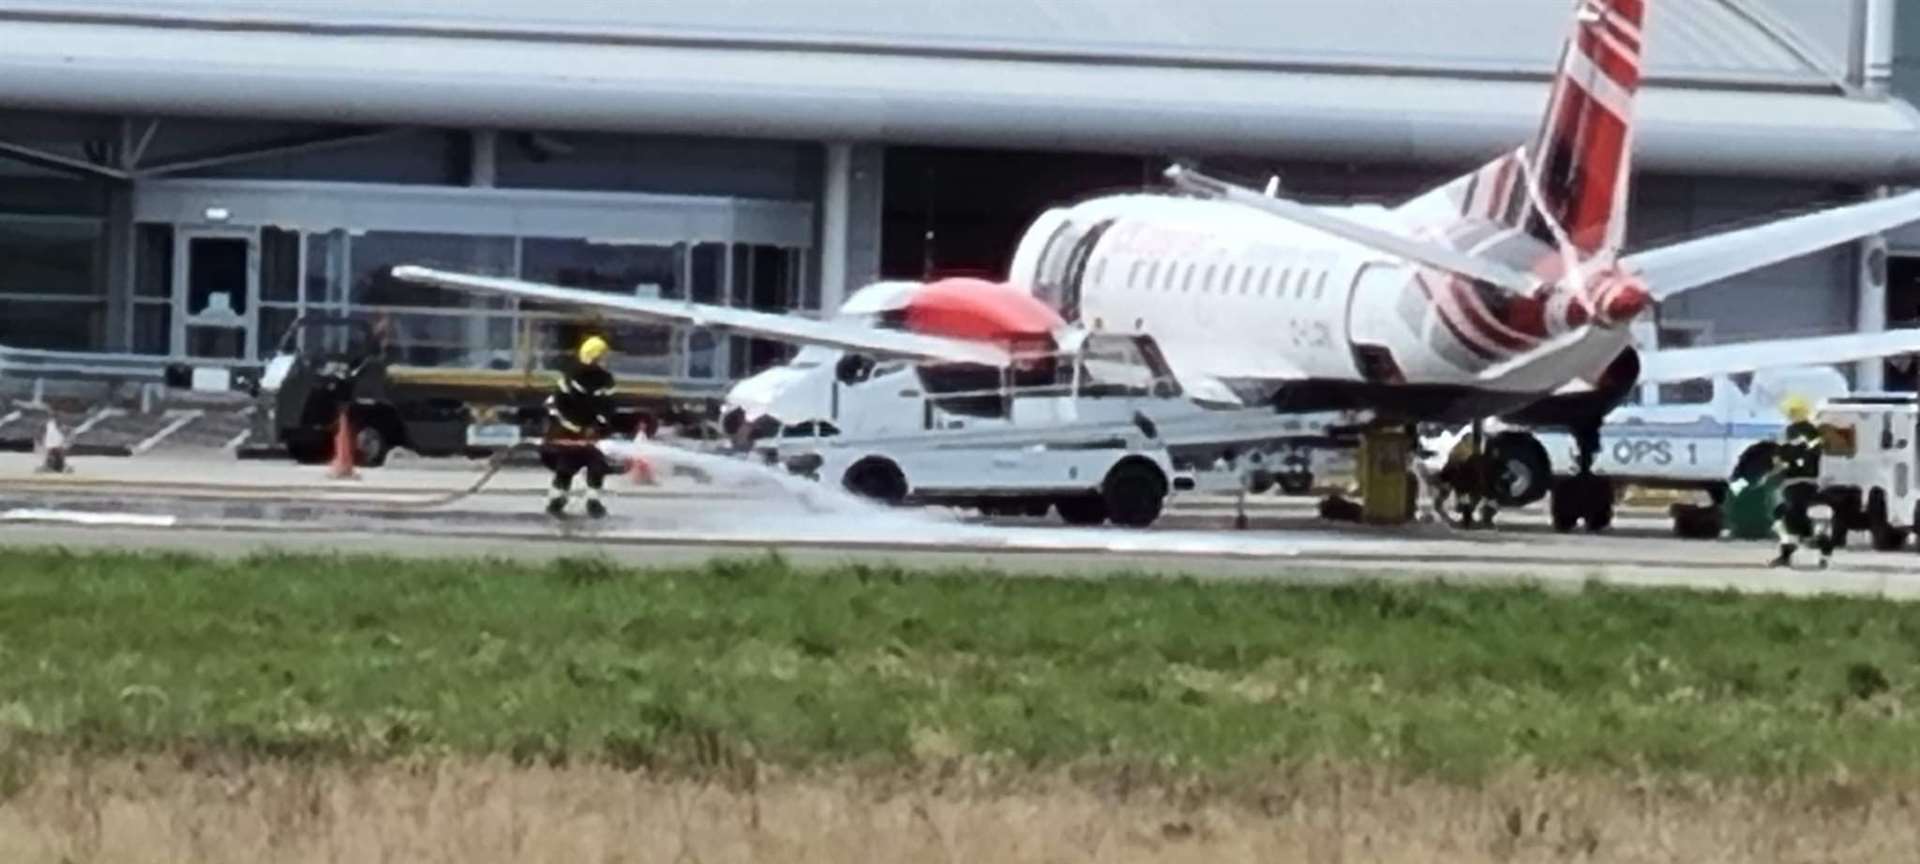 The incident at Inverness Airport.